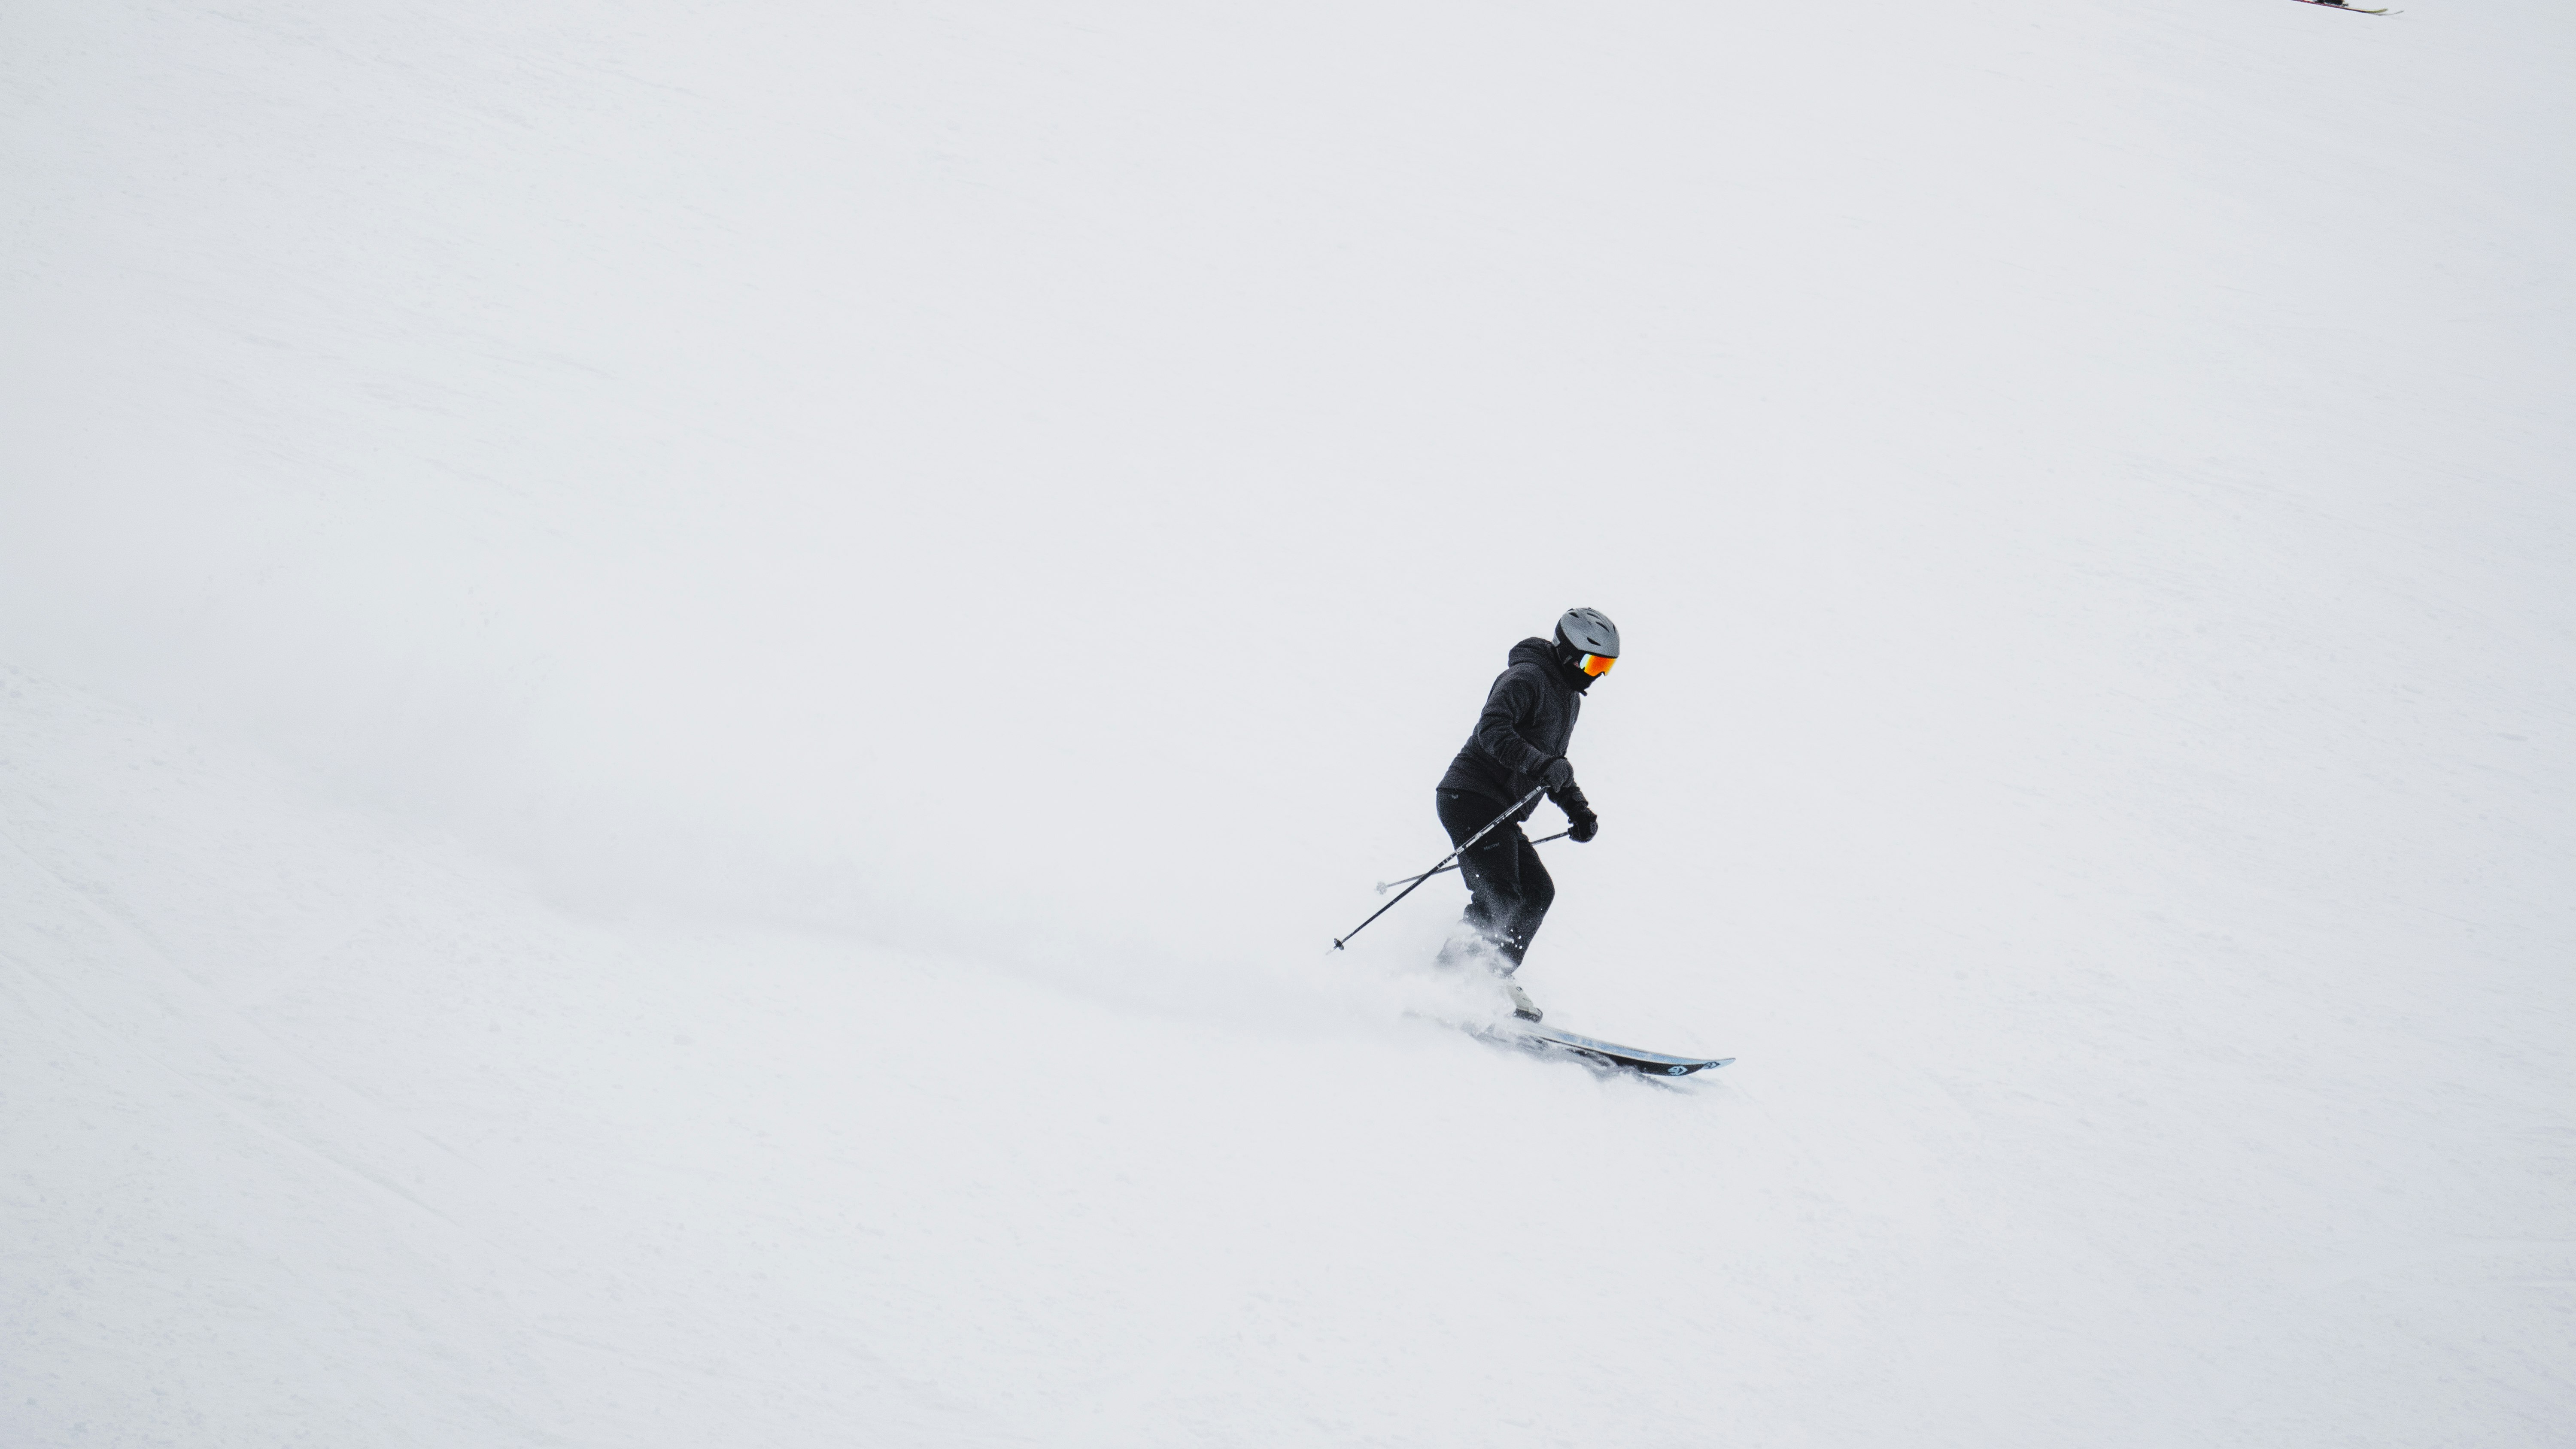 man in black jacket and black pants riding ski blades on snow covered ground during daytime